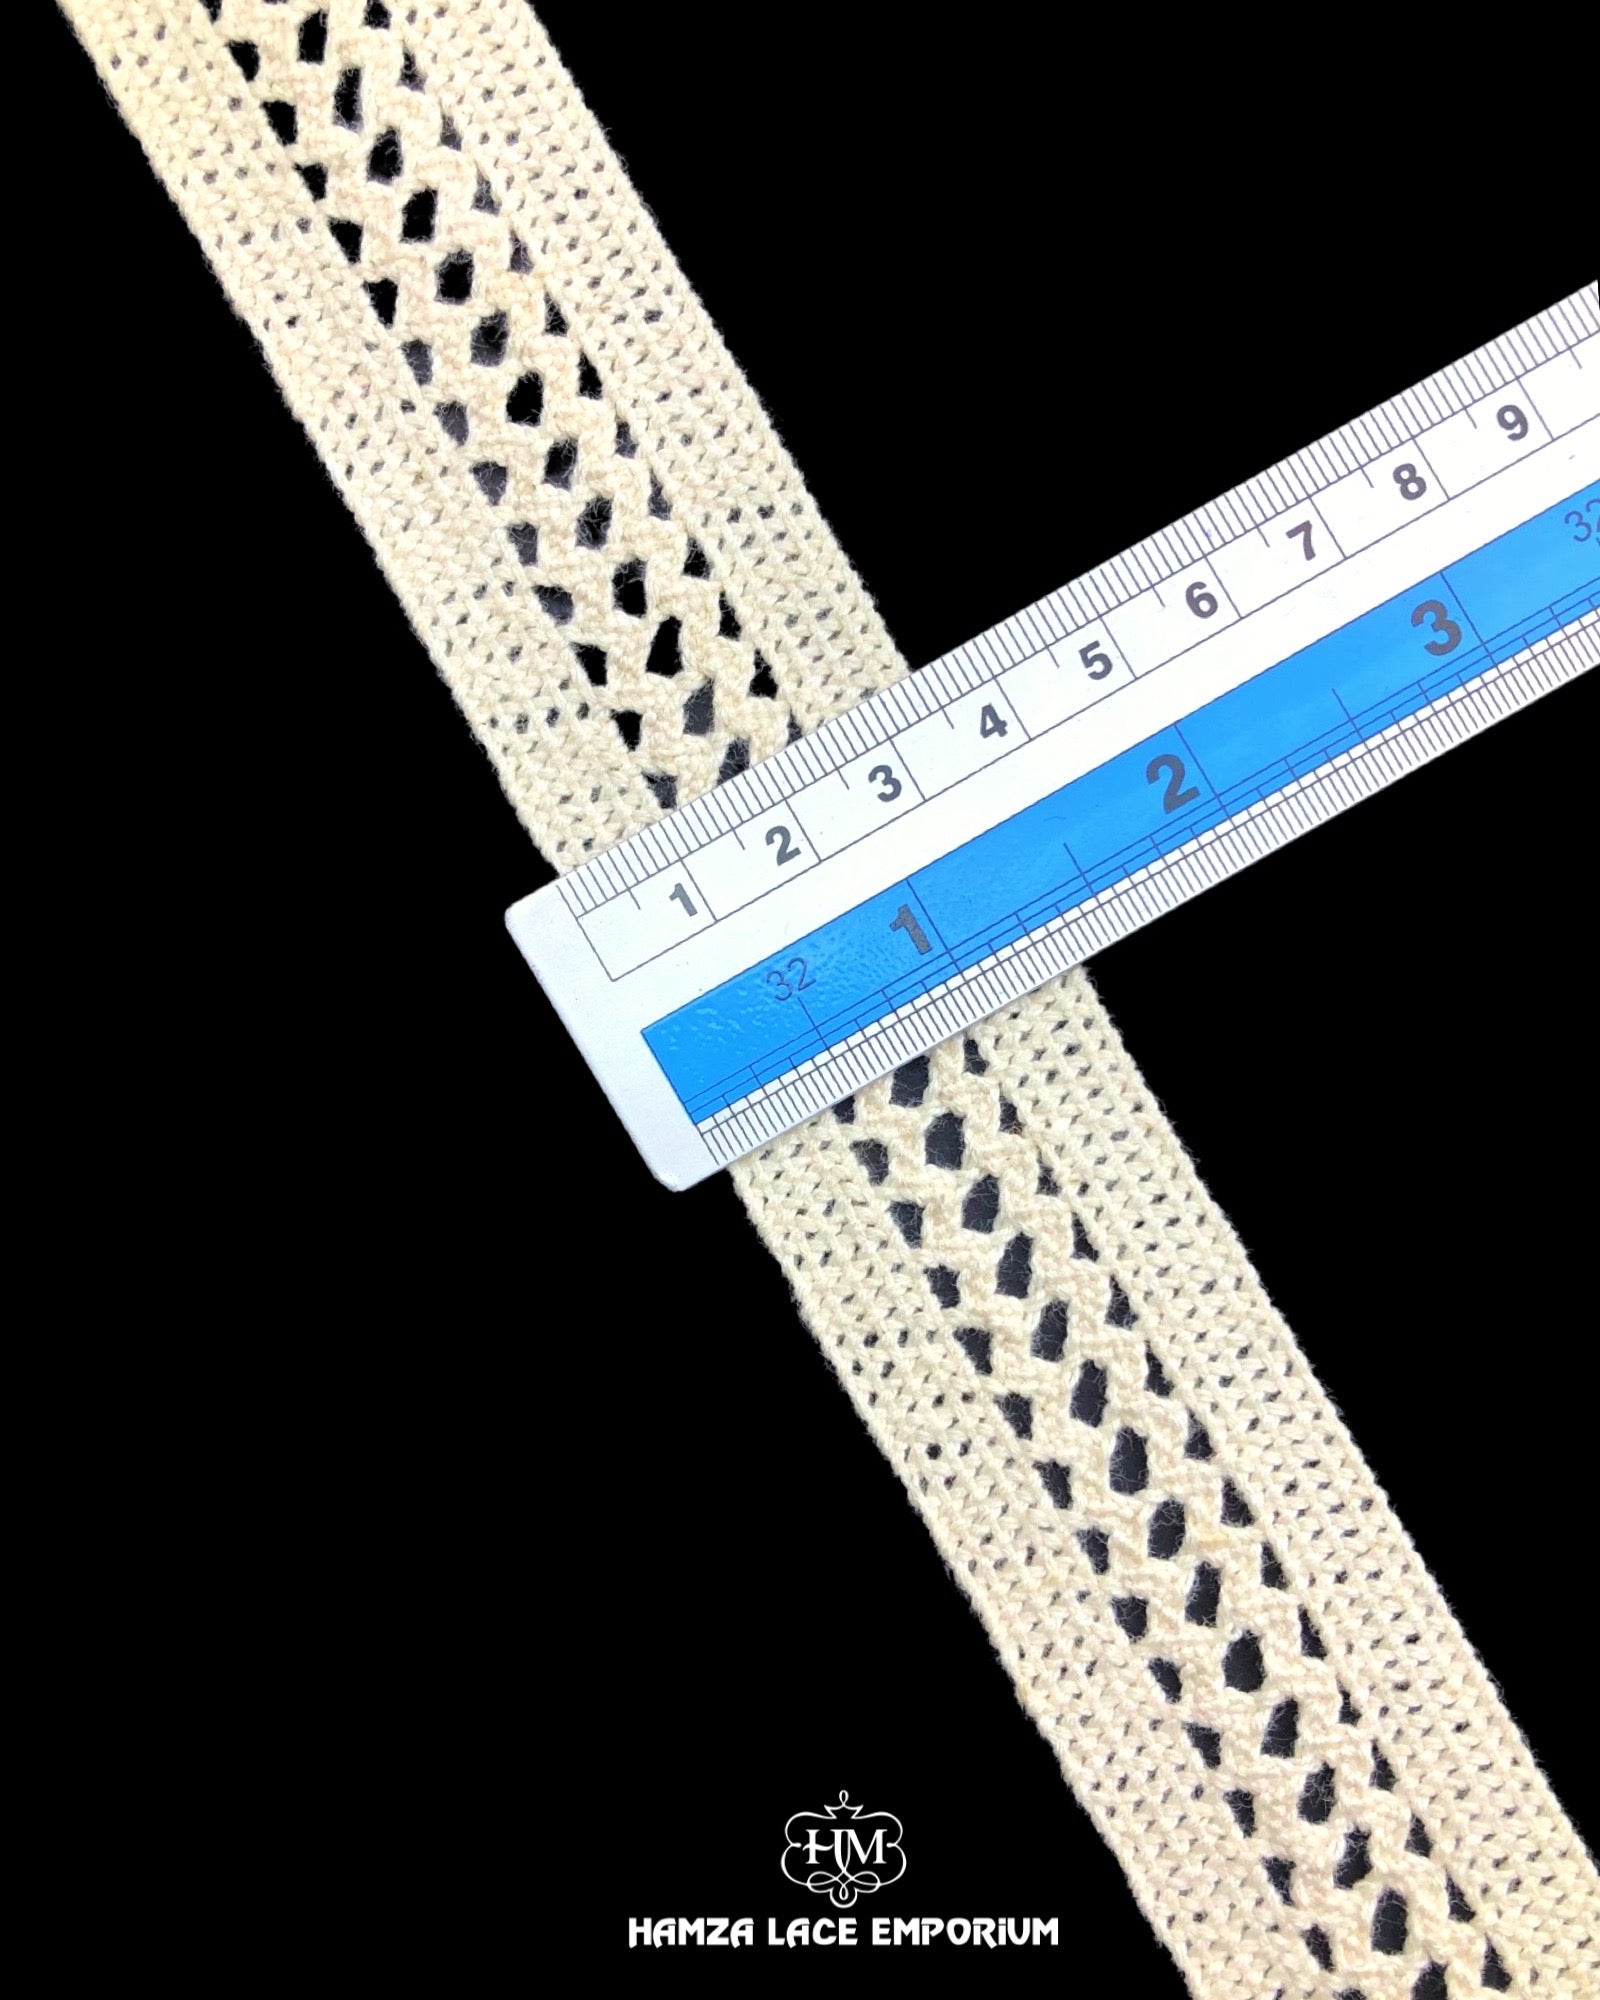 Size of the 'Center Filling Crochet Lace 22306' is shown with the help of a ruler as '1.5' inches